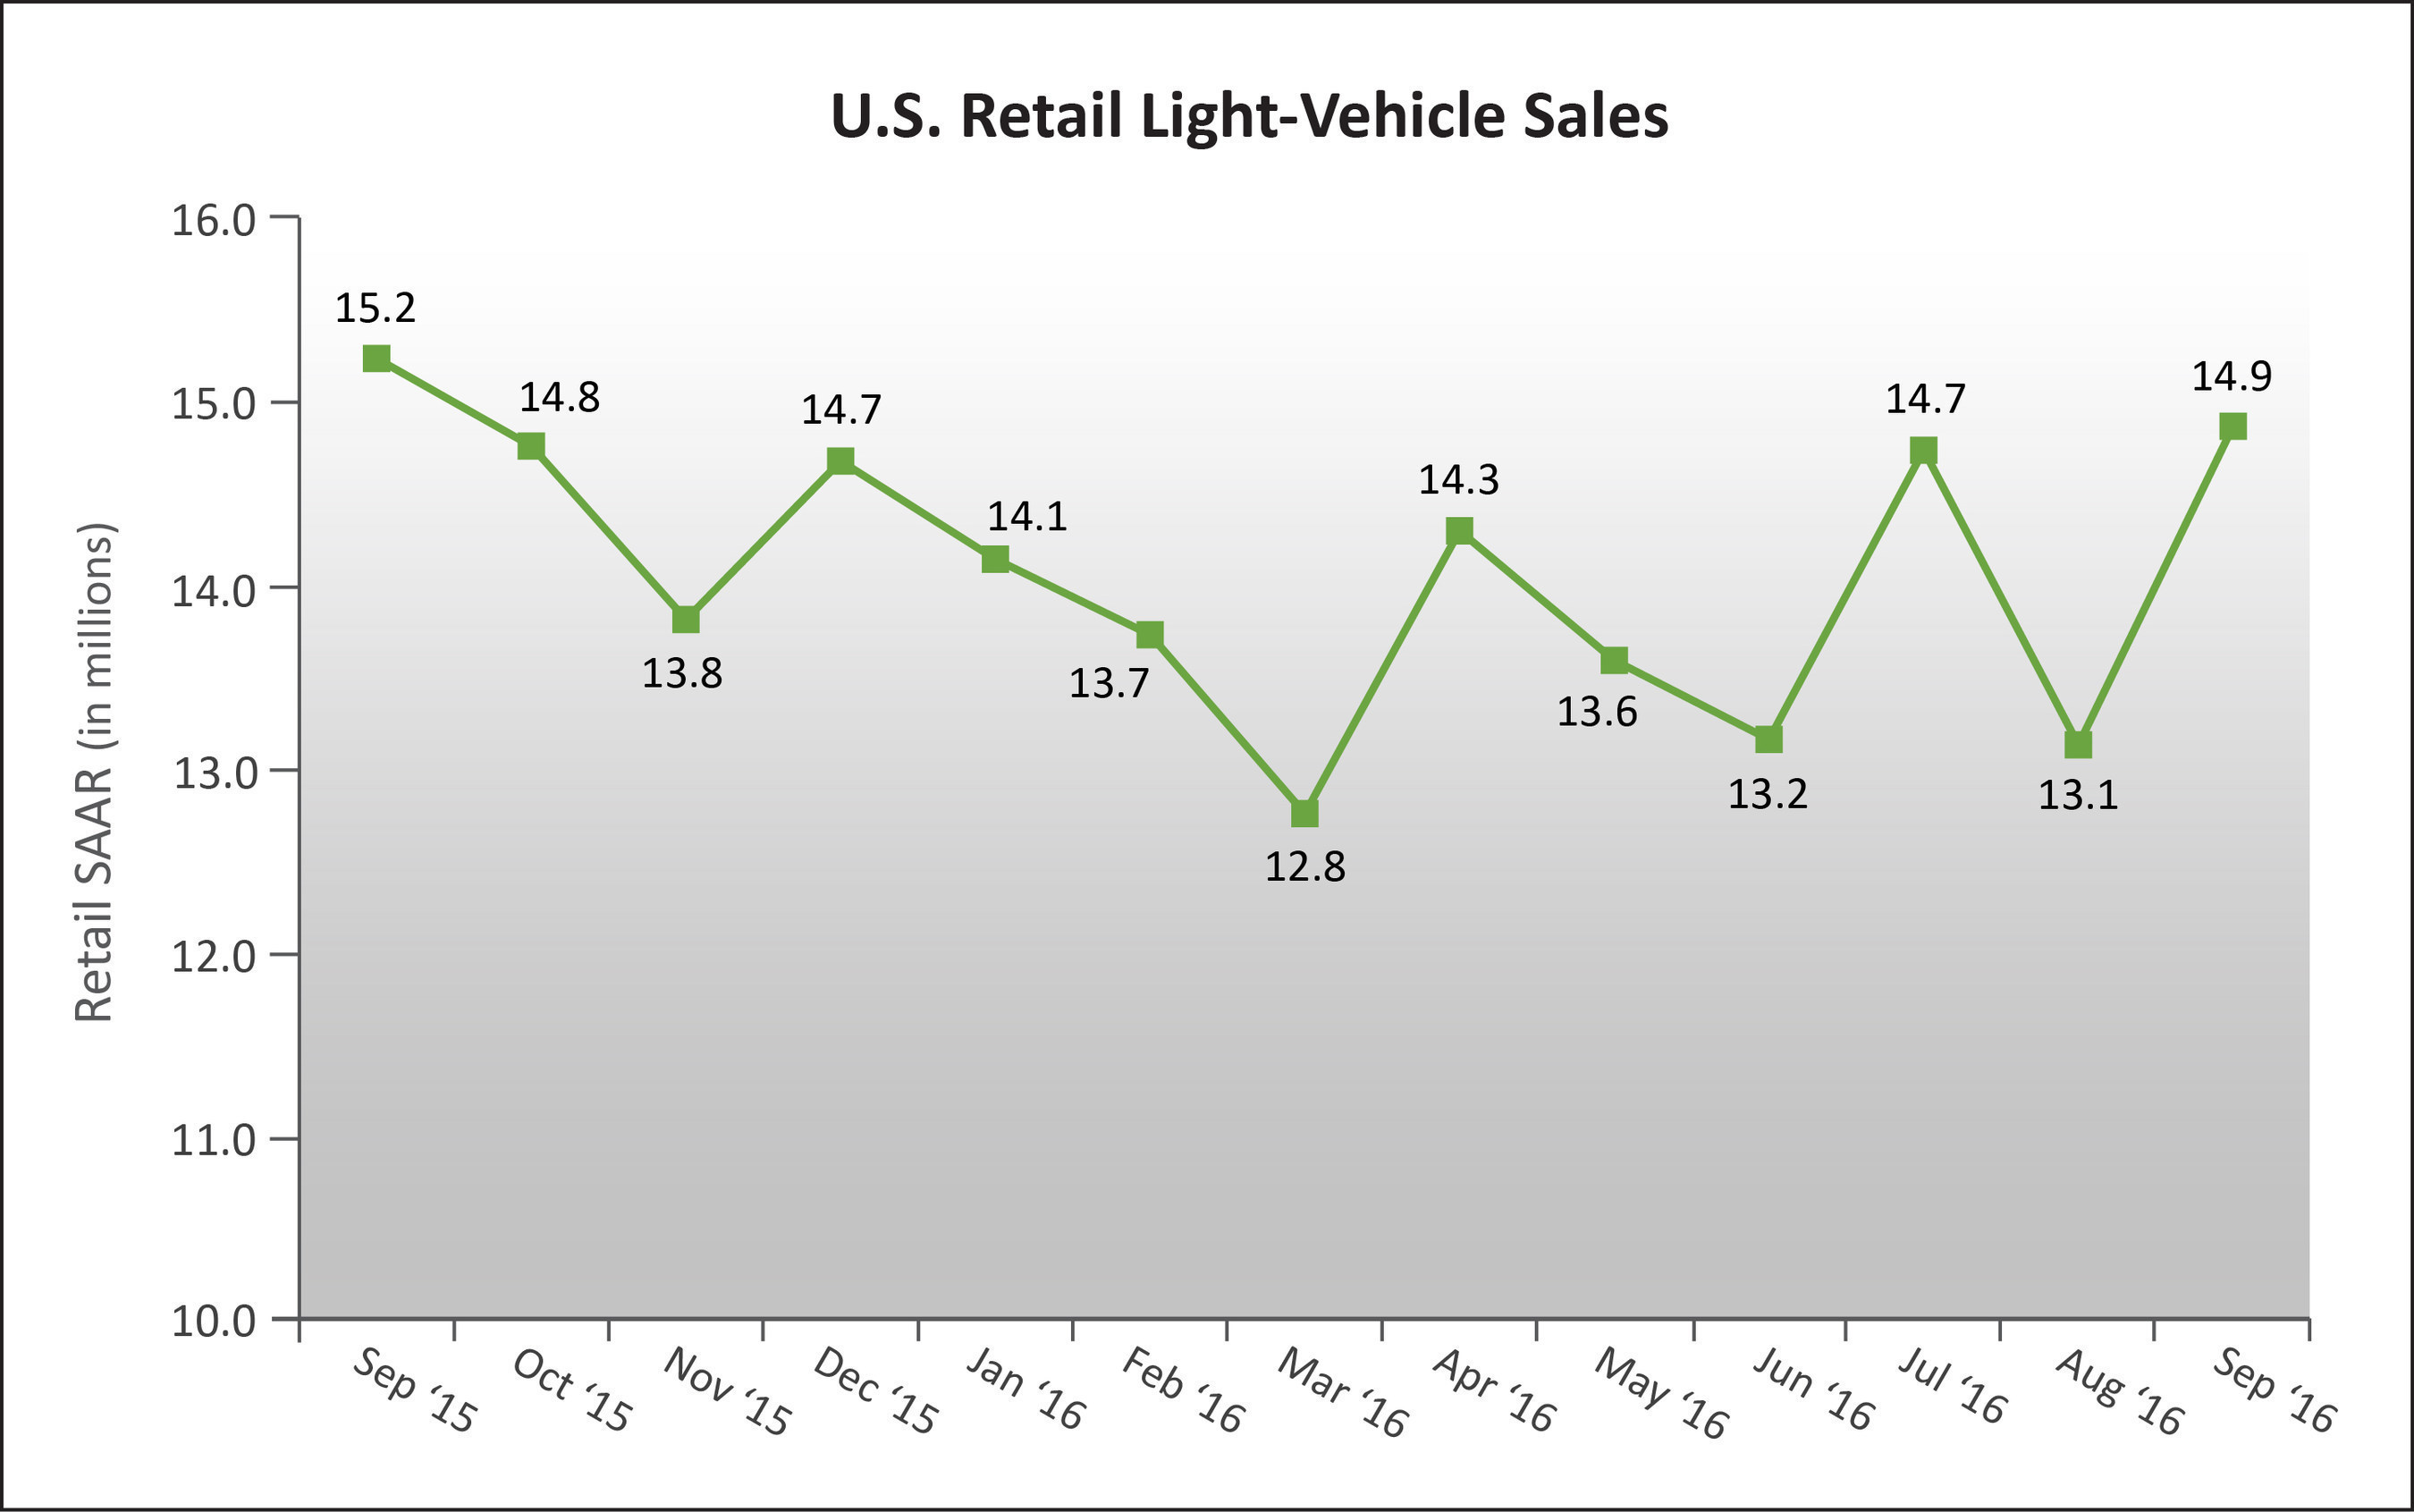 U.S. Retail SAAR--September 2015 to September 2016 (in millions of units). Source: Power Information Network(R) (PIN) from J.D. Power